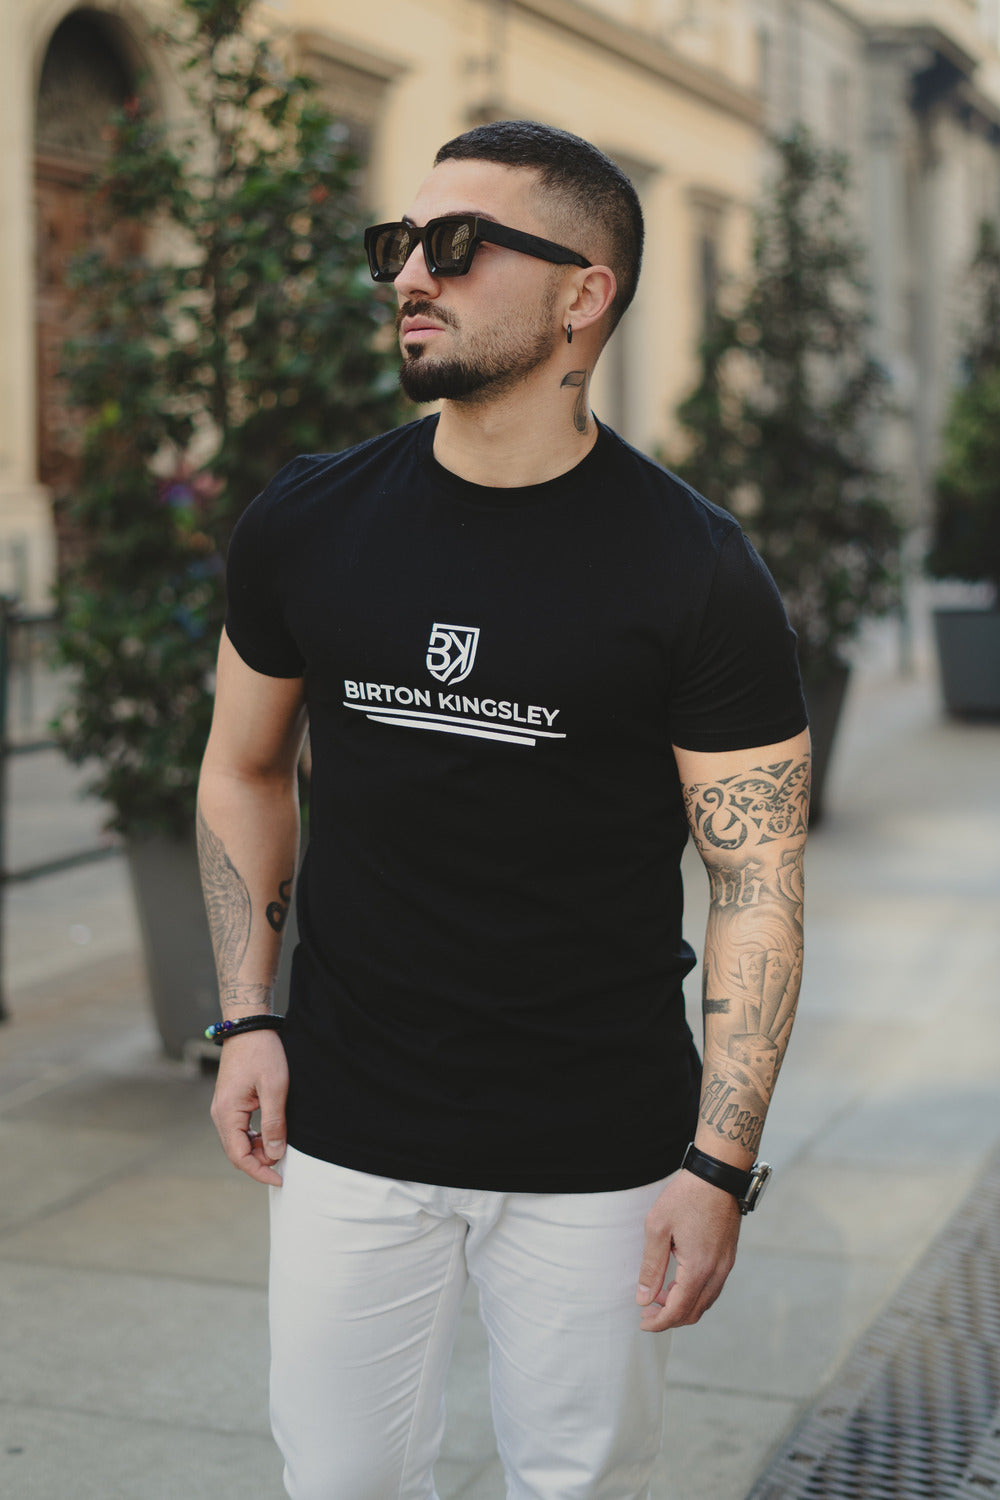 Exeter - Premium T-shirt made from 100% Supima cotton